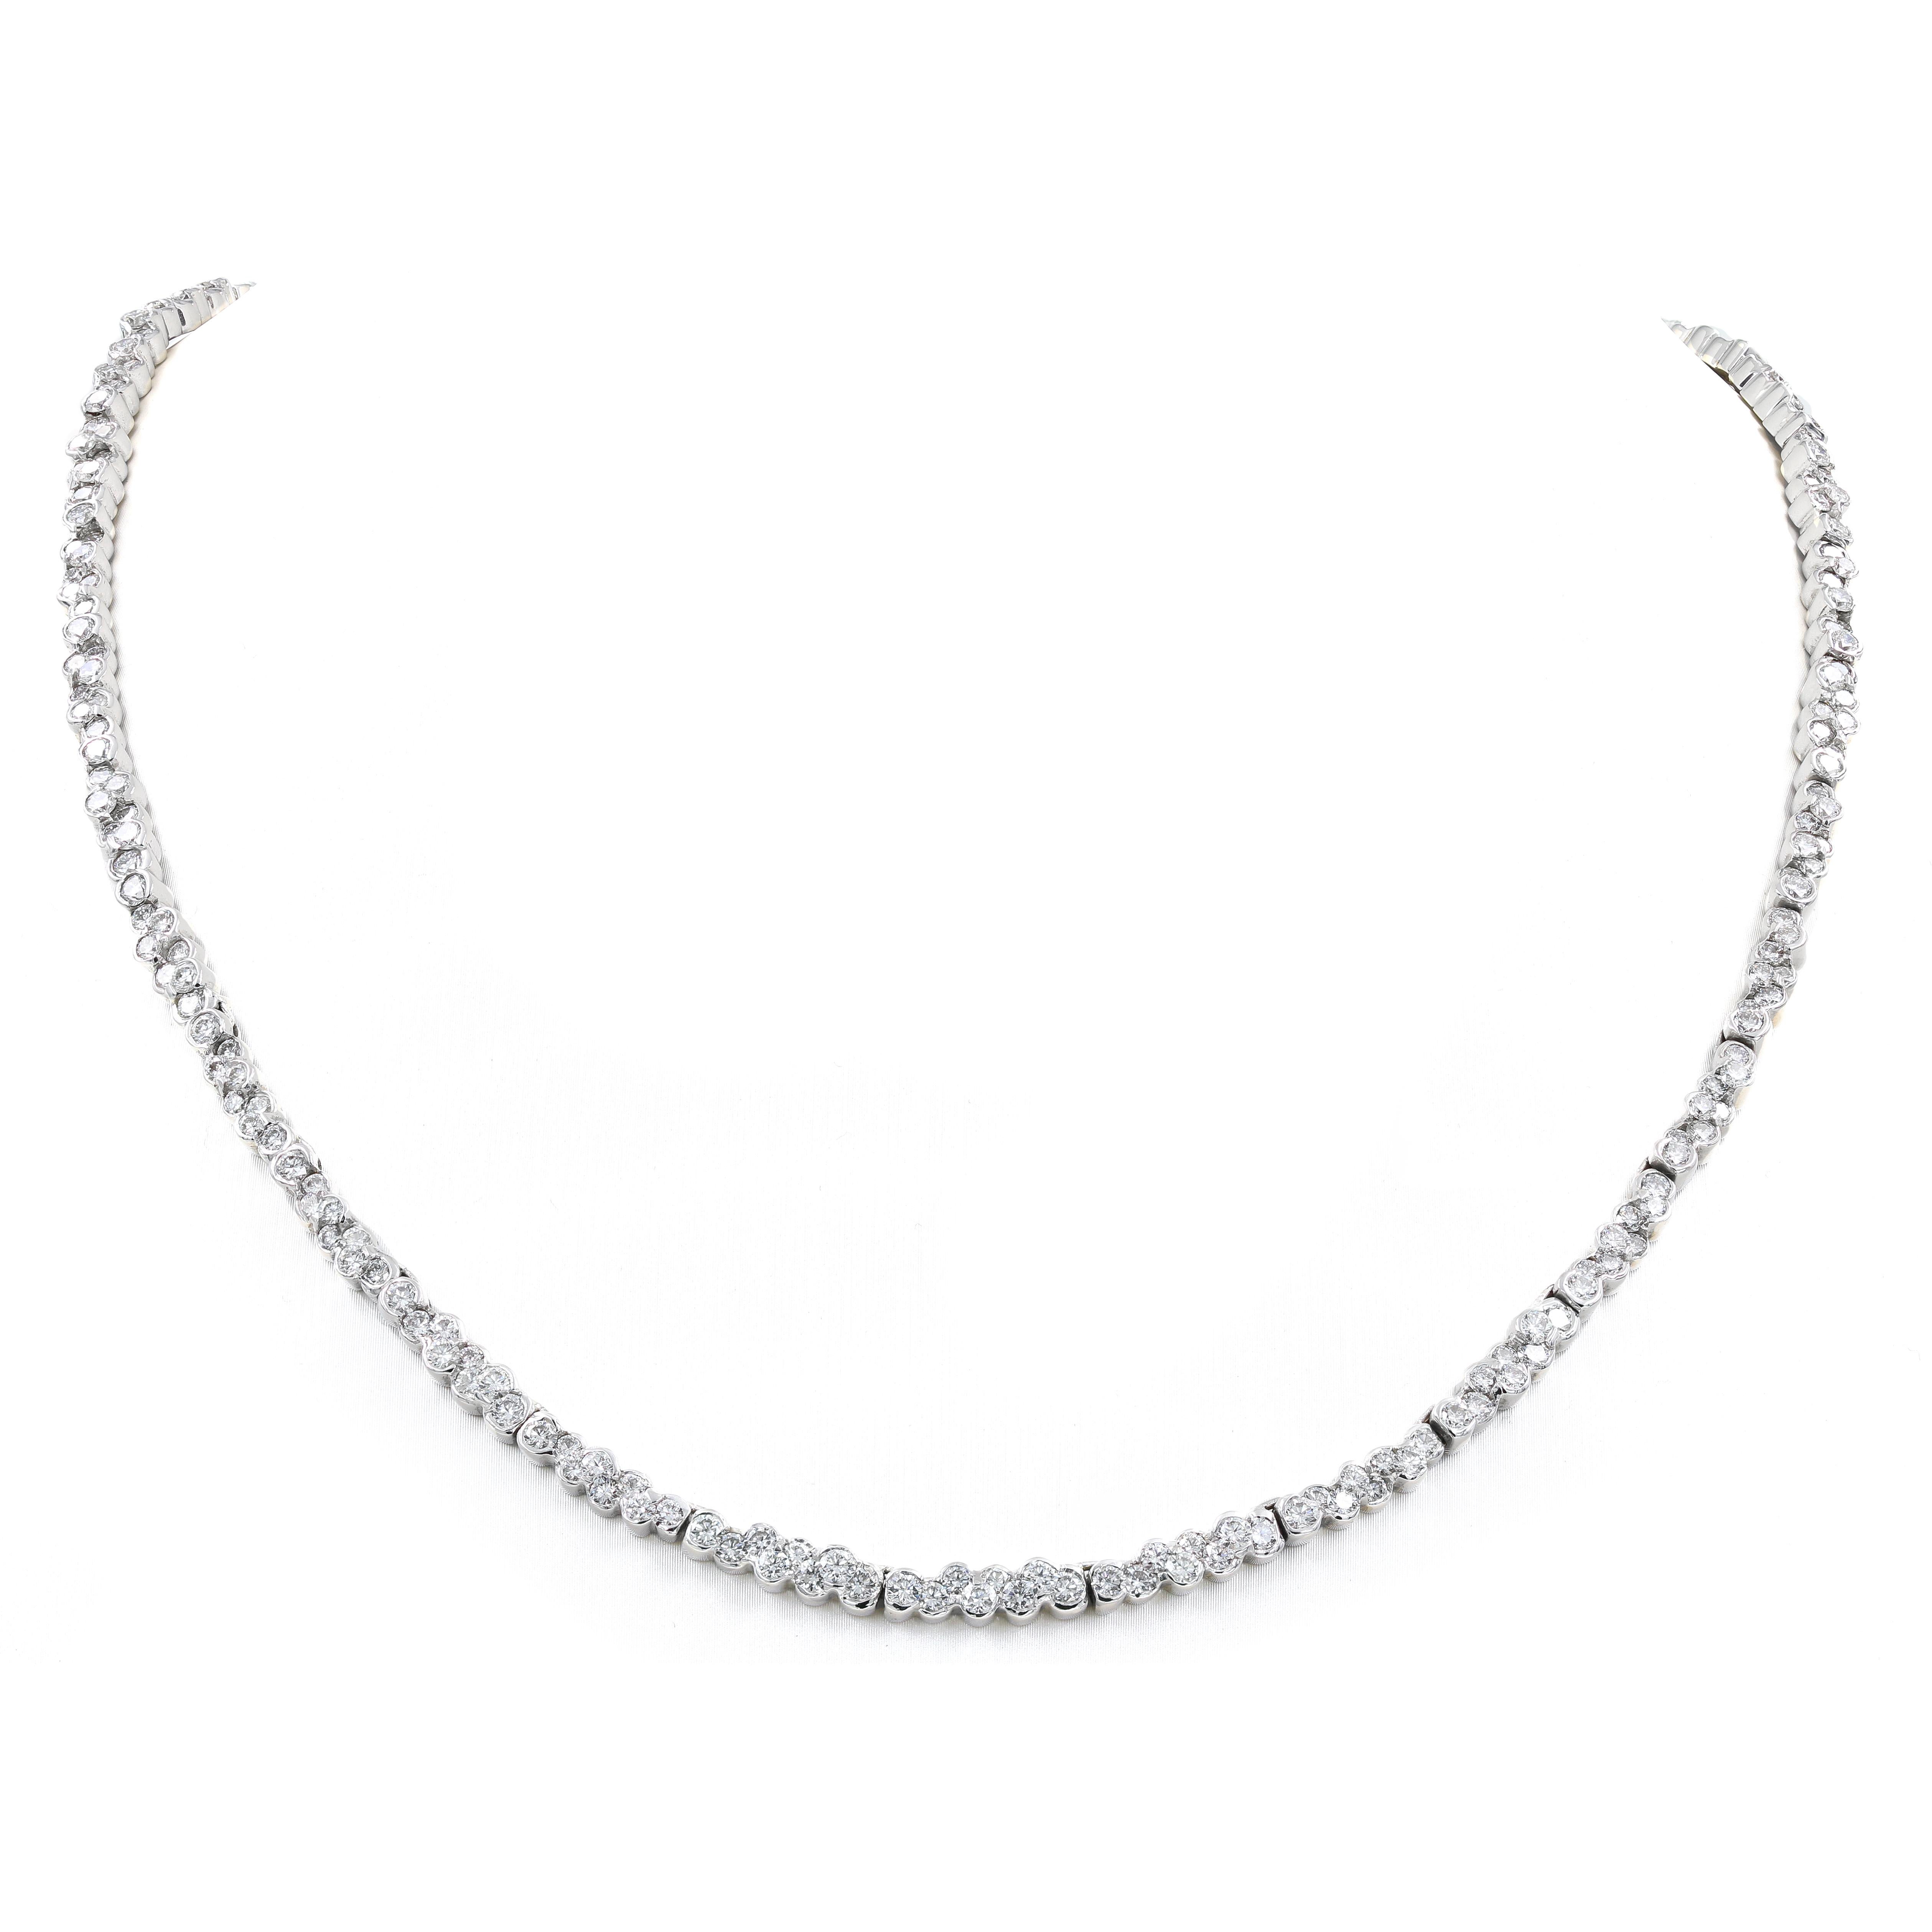 This magnificent Lester Lampert original CumuLLus® CeLLebration diamond necklace in 18kt. white gold has 288 ideal cut round diamonds= 10.50cts. t.w. The diamonds are G-H in color and VS in clarity. The necklace is 18 1/4